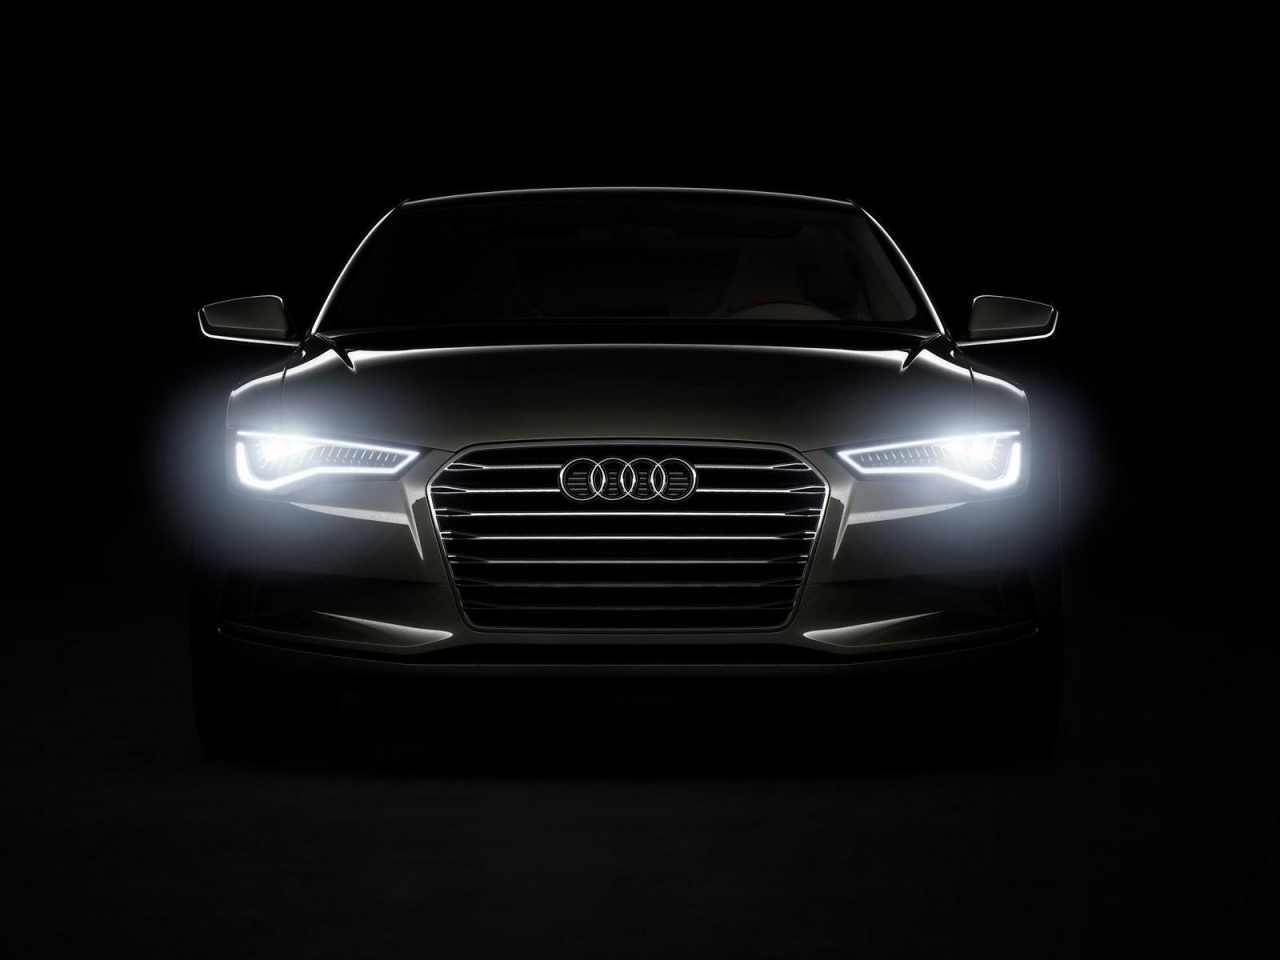 Audi A7 Headlights for 1280 x 960 resolution